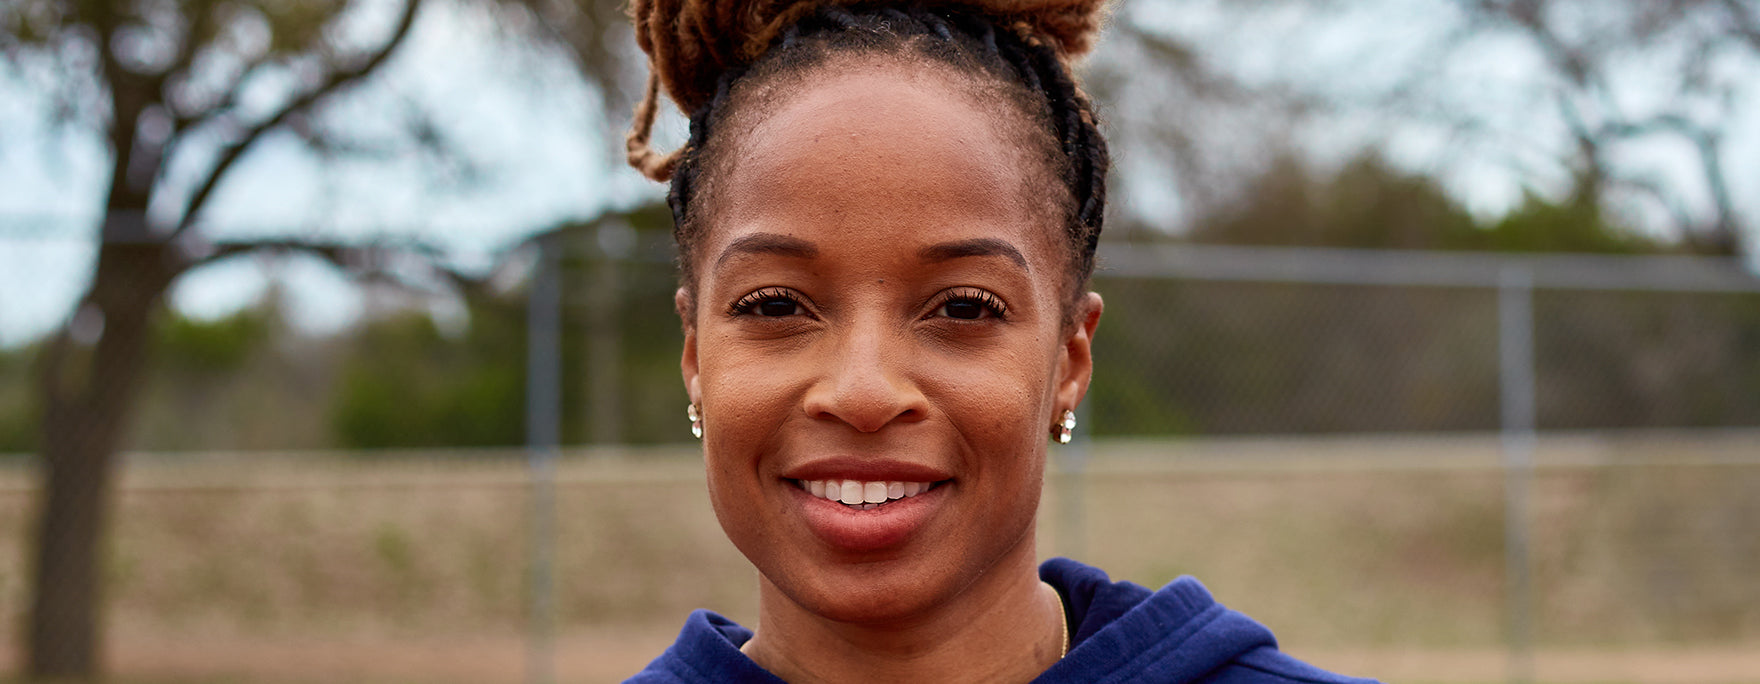 OLYMPIAN NATASHA HASTINGS DEMONSTRATES GRACE & RESILIENCE BOTH ON THE TRACK AND OFF